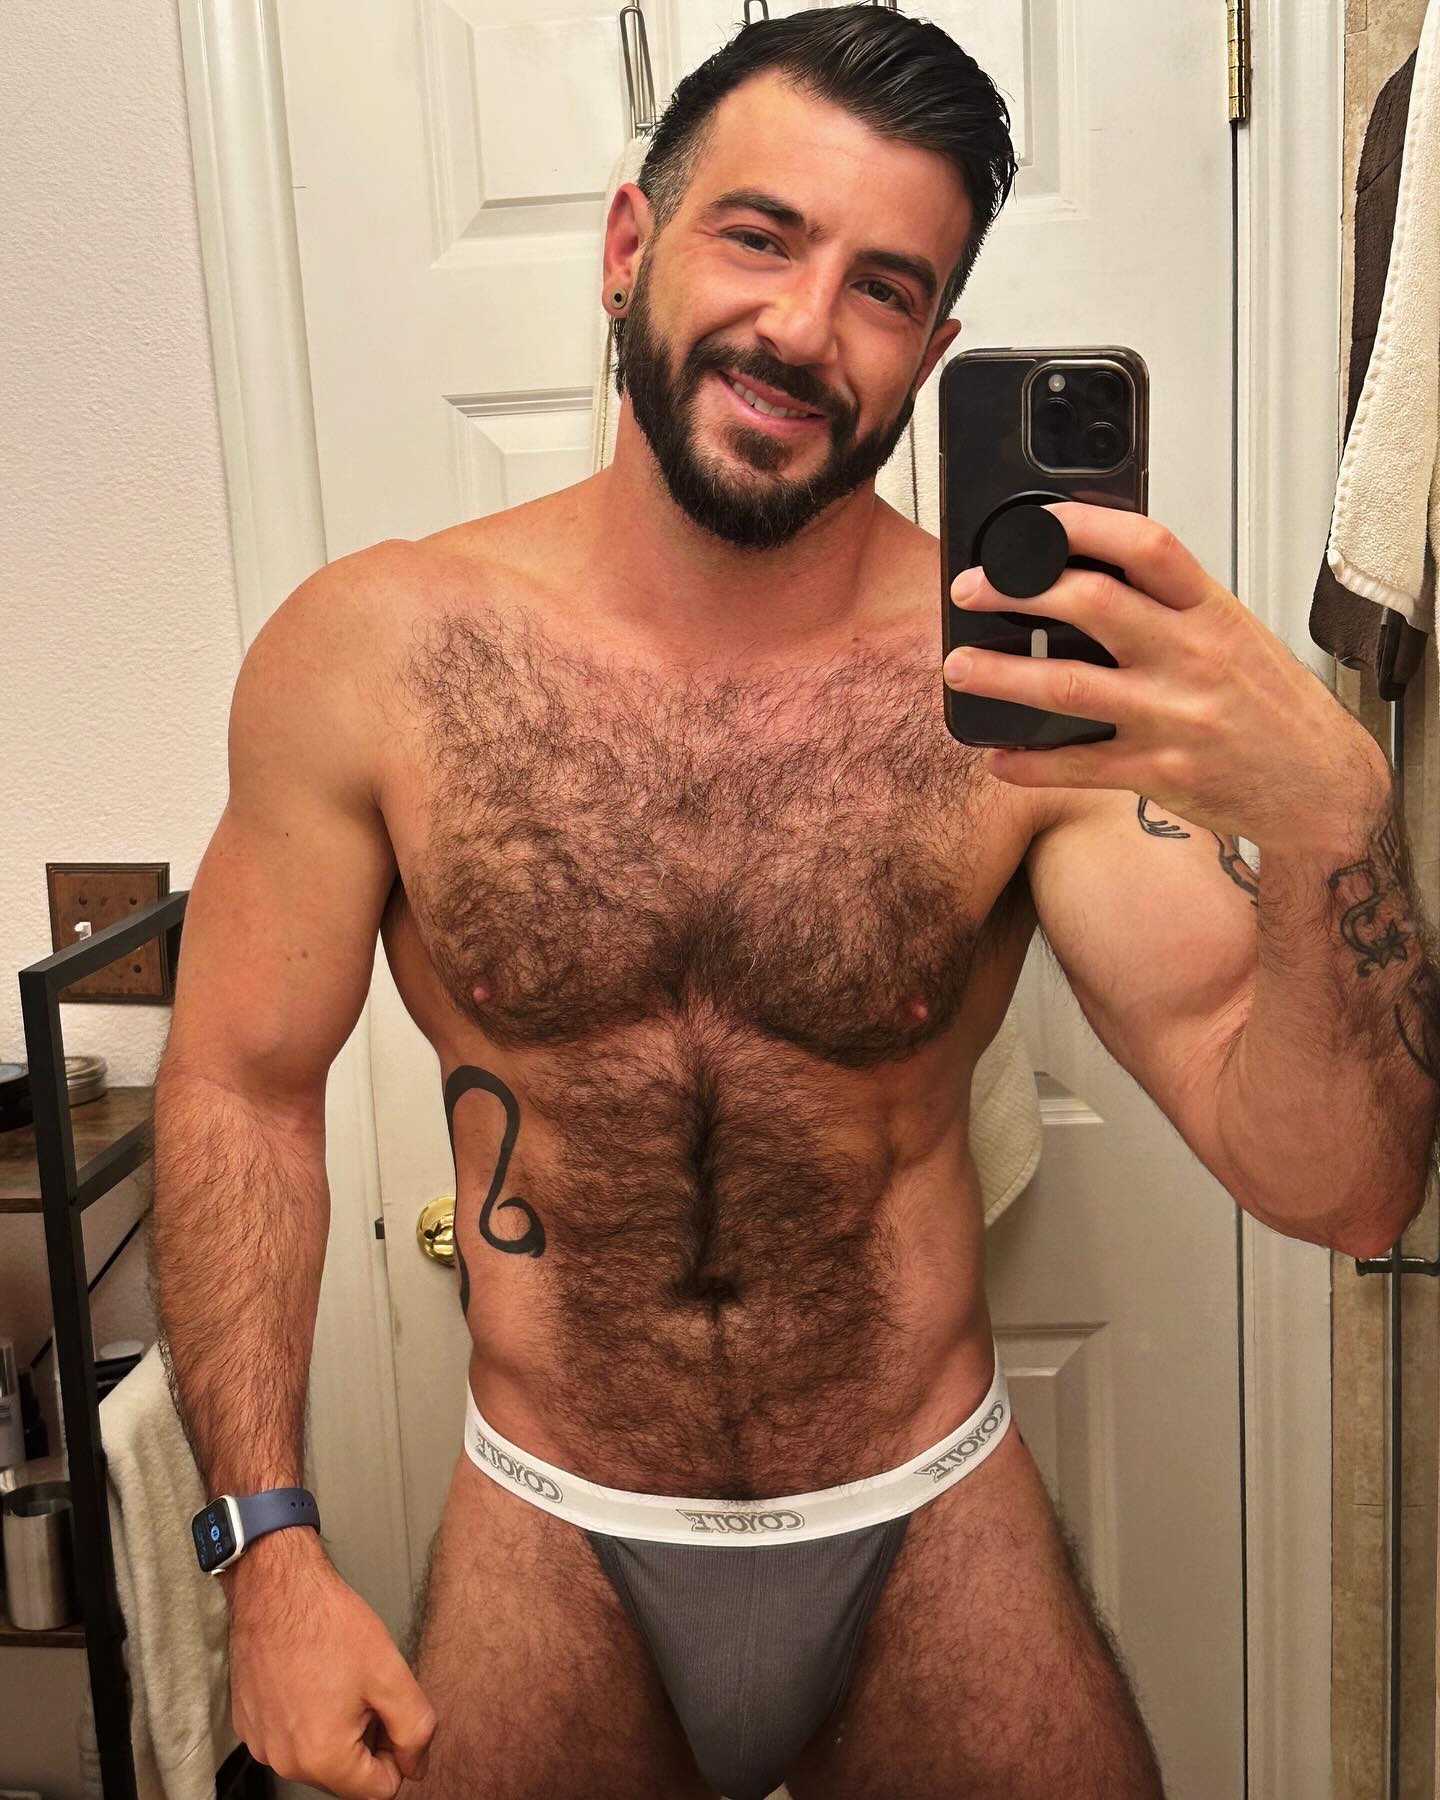 What do we think of these? 🩲 

.

.

.

.

.

#hairyscruffyhomo #hairymusclecub #hairymusclejock #hairygayman #hairygayguy #hairymenlovers #hairymens #hairygays #musclegay #muscleman #musclesandtattoos